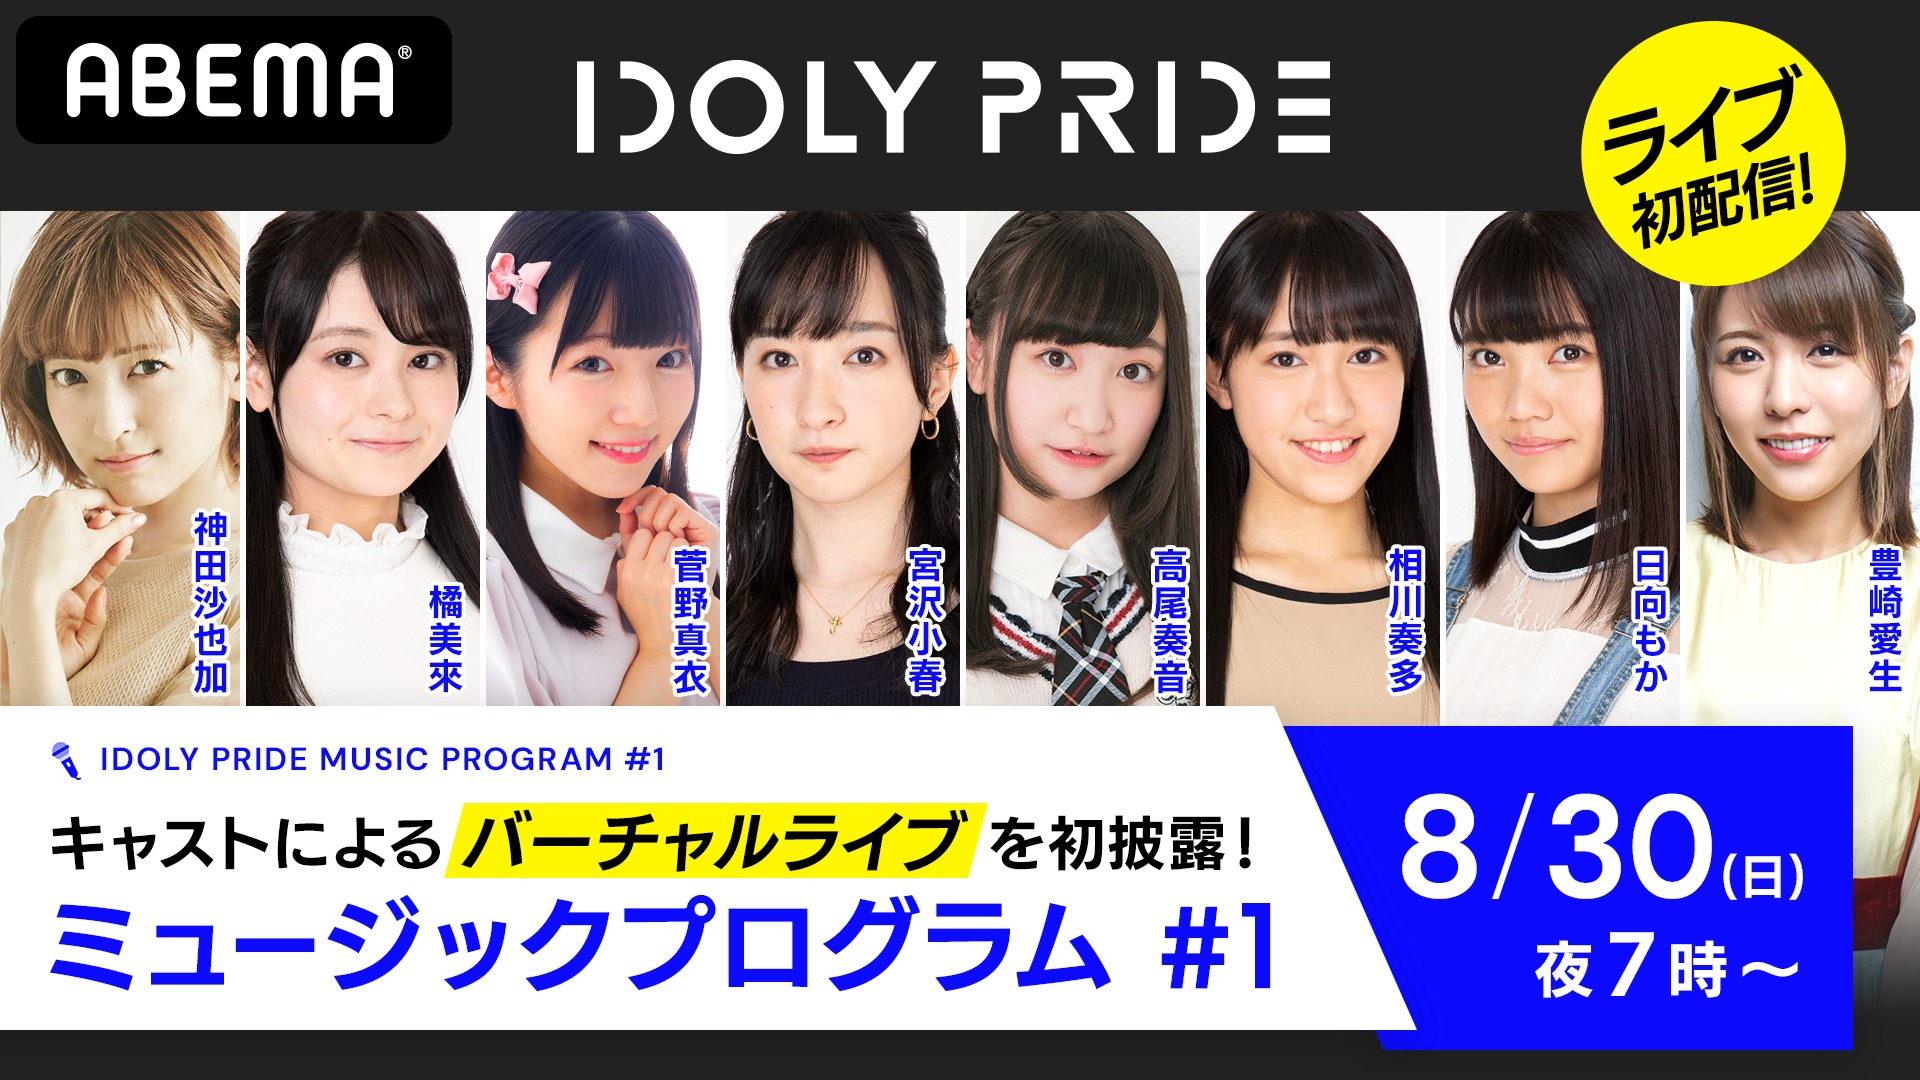  （C）2019 Project IDOLY PRIDE （C） 2019 Project IDOLY PRIDE / 星見プロダクション